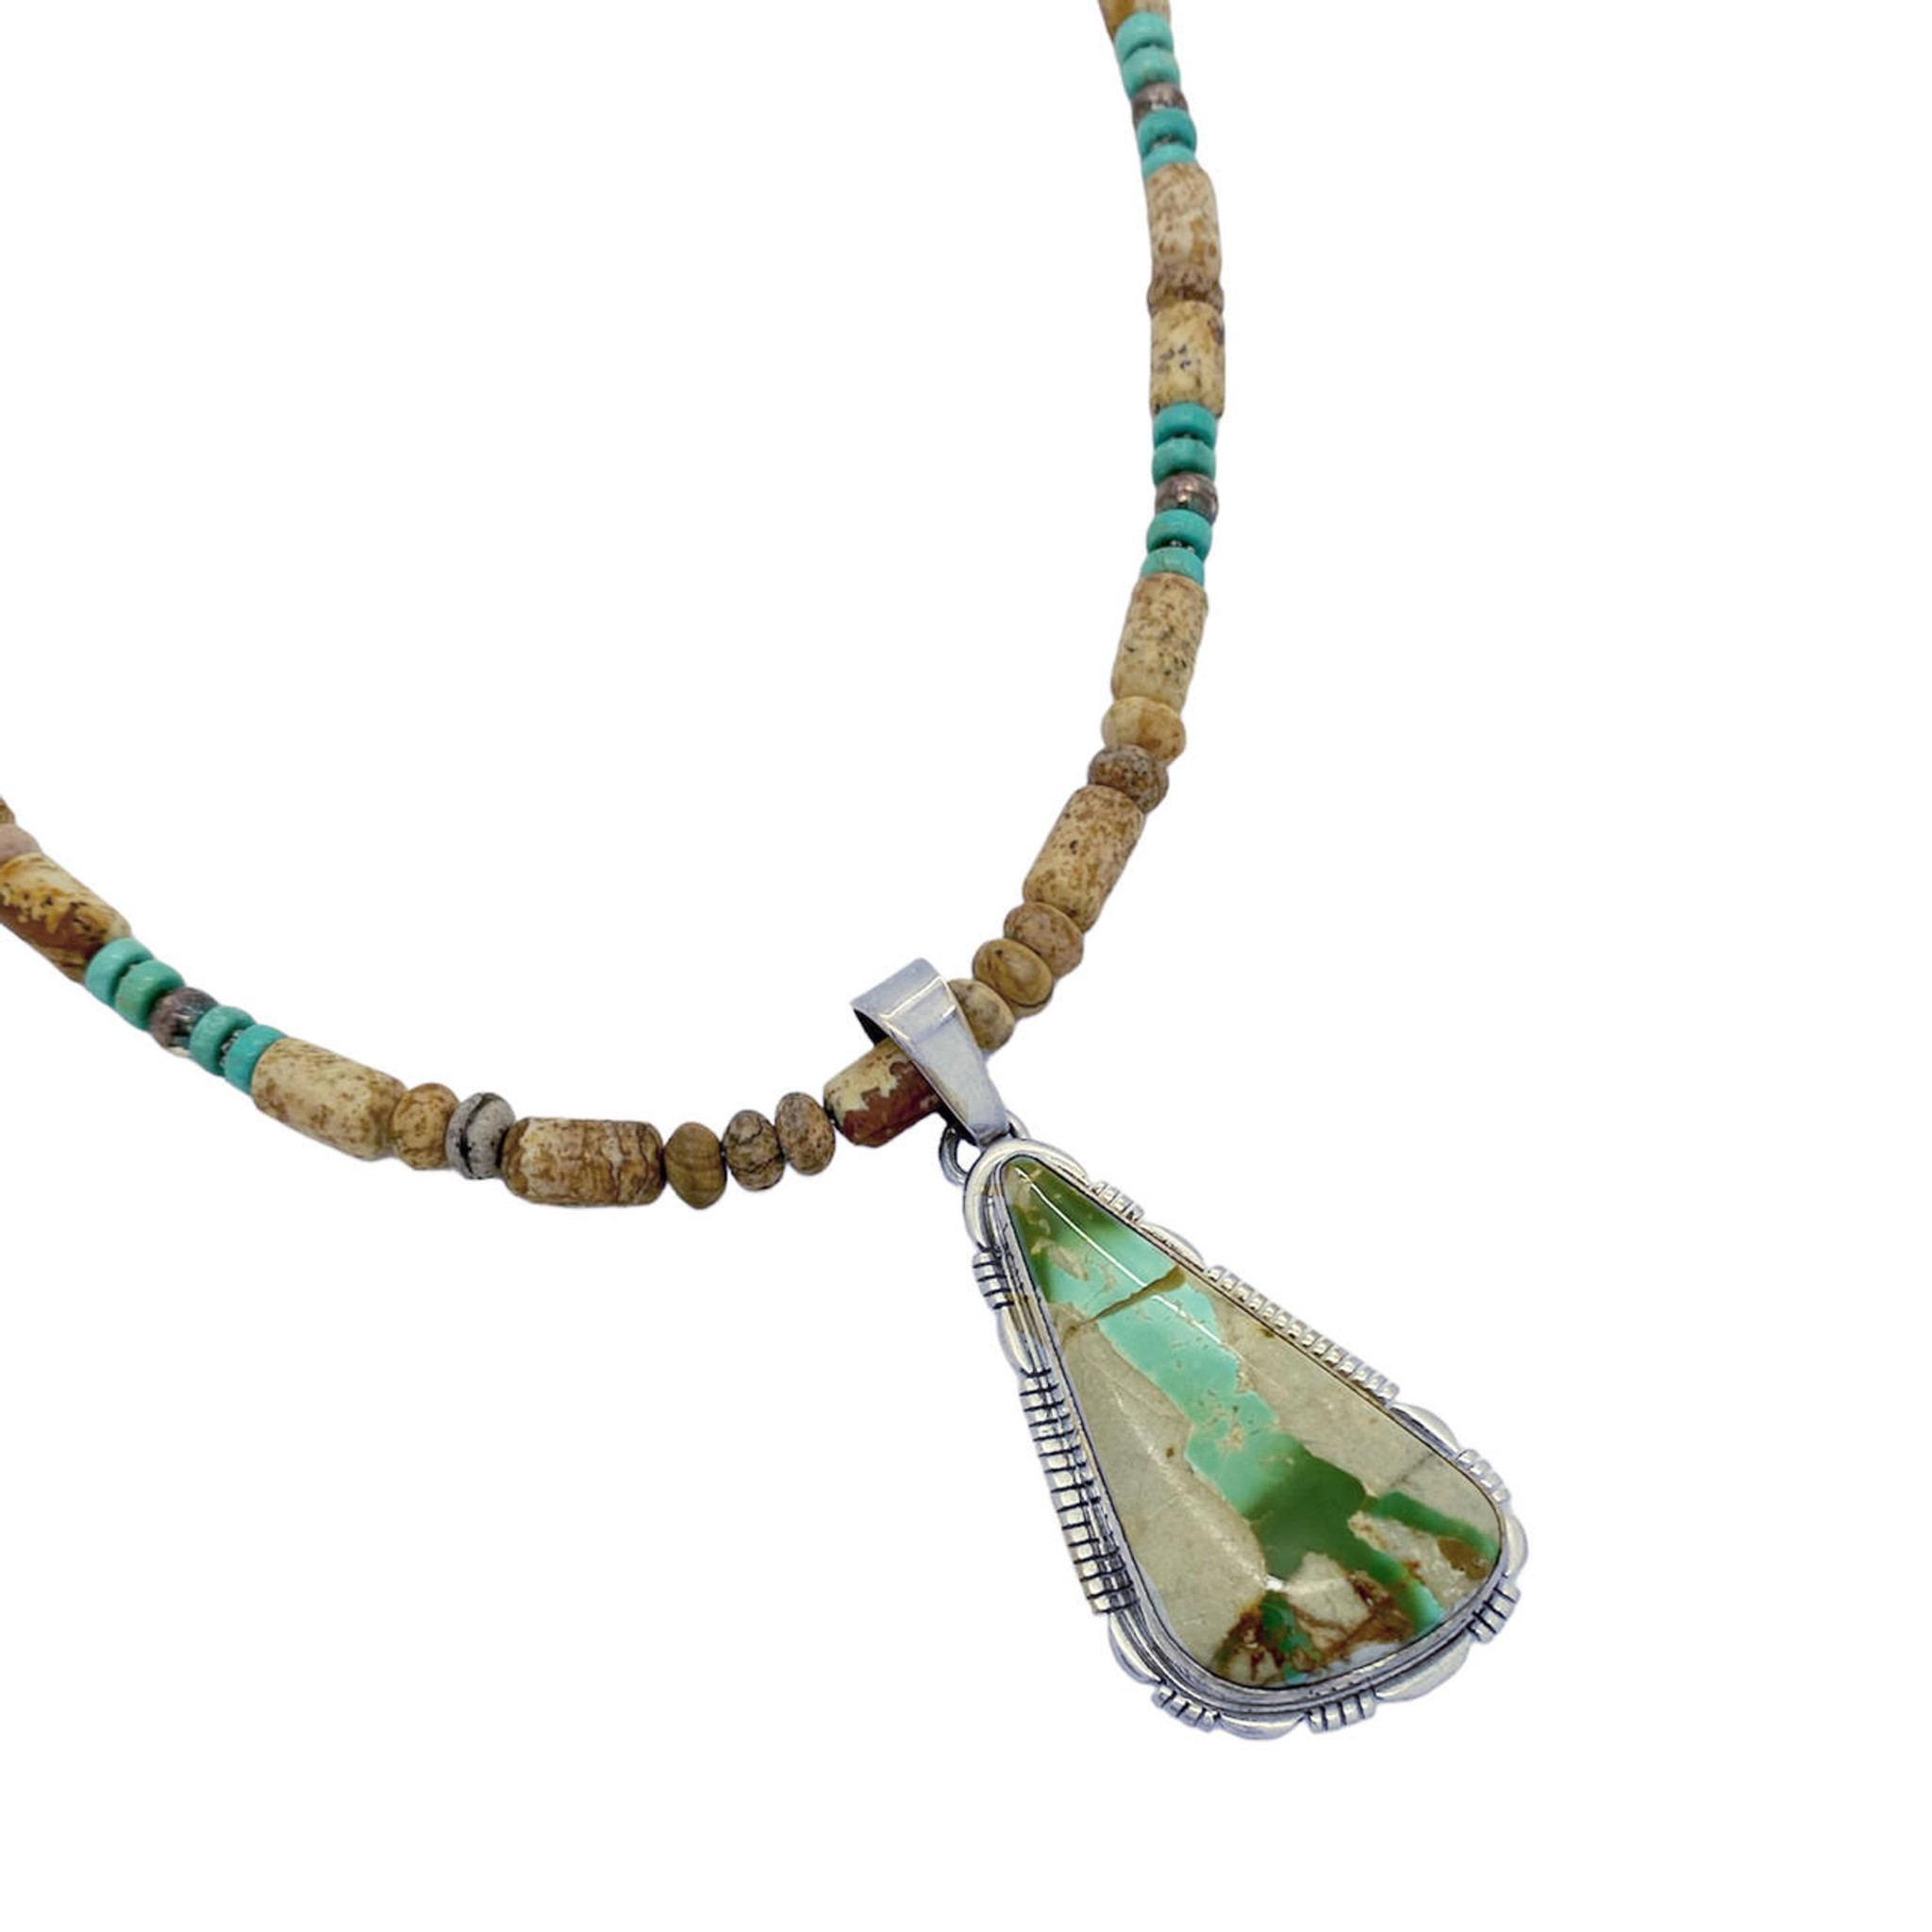 Turquoise Necklace with Silver Feather Pendant - Southwest Indian  Foundation - 6197